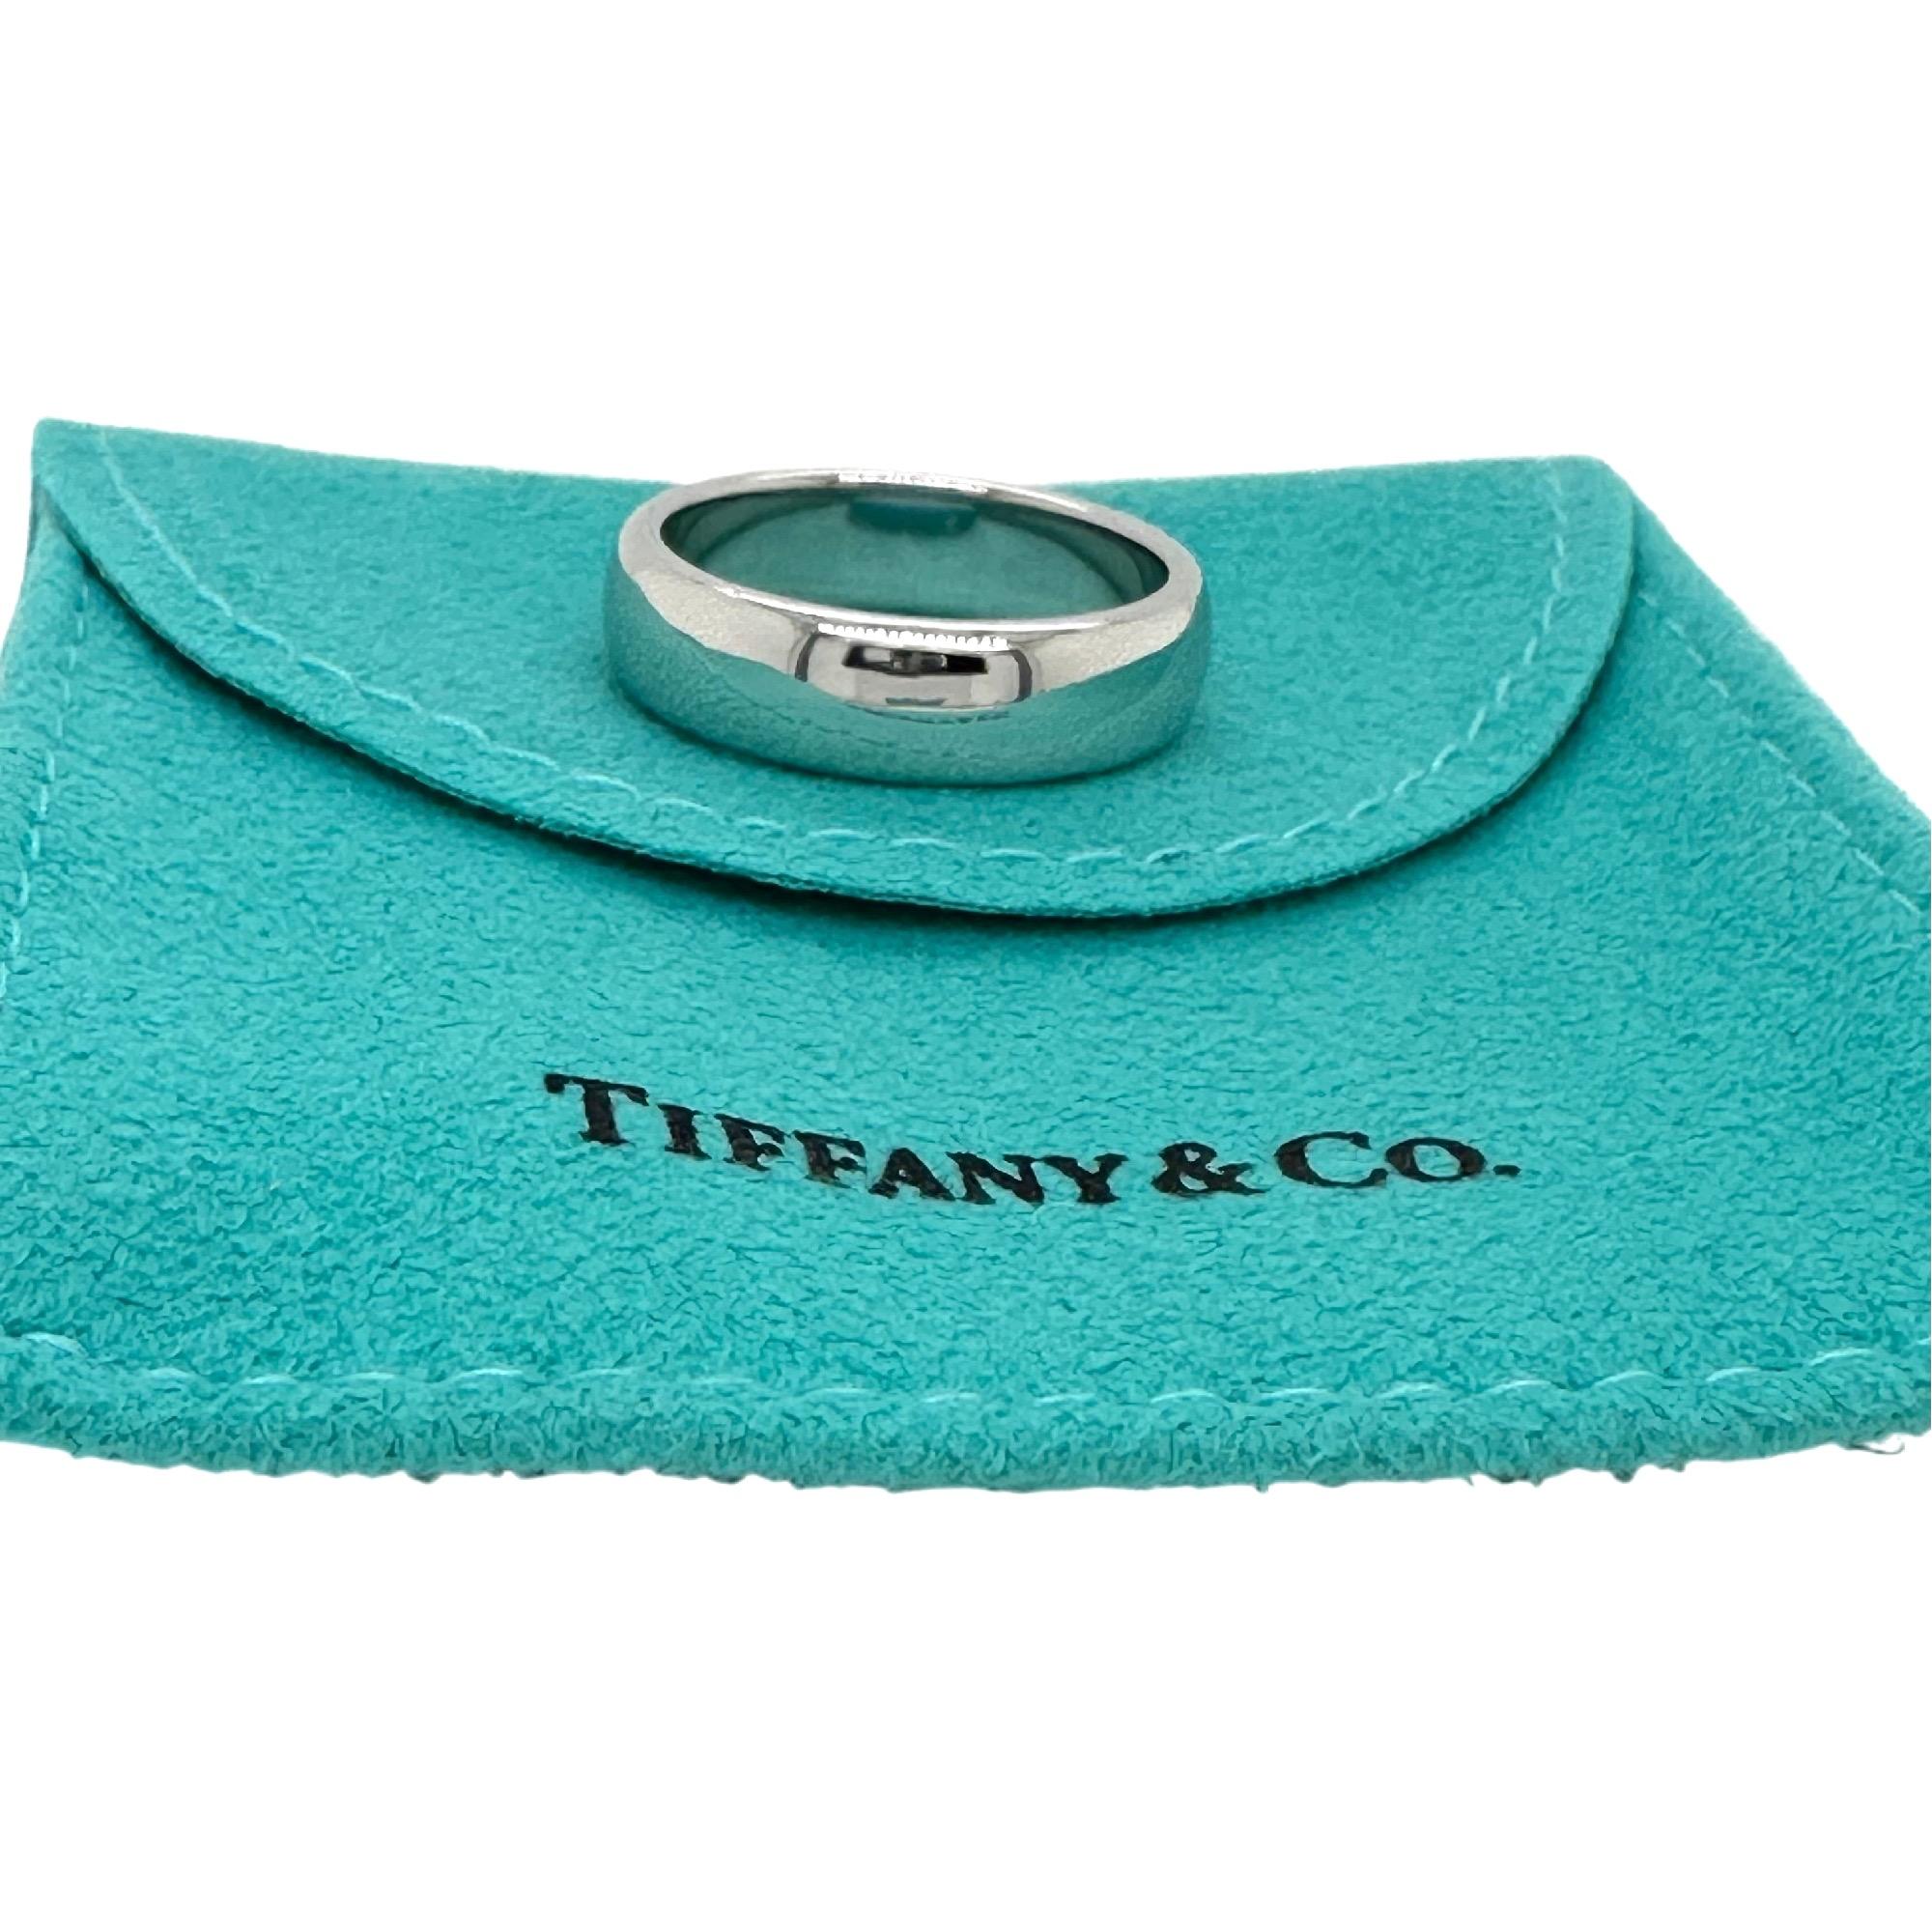 TIFFANY & CO. Lucida Wedding Band
Style:  LUCIDA
Ref. number:  14764909
Metal:  PT950
Size:  8.5 sizable
Measurements:  6 MM
Hallmark:  ©1999 TIFFANY&CO.PT950
Includes:  Tiffany & Co. Jewelry Pouch
Retail:  $2,660
Sku##1750TSHDEN100822